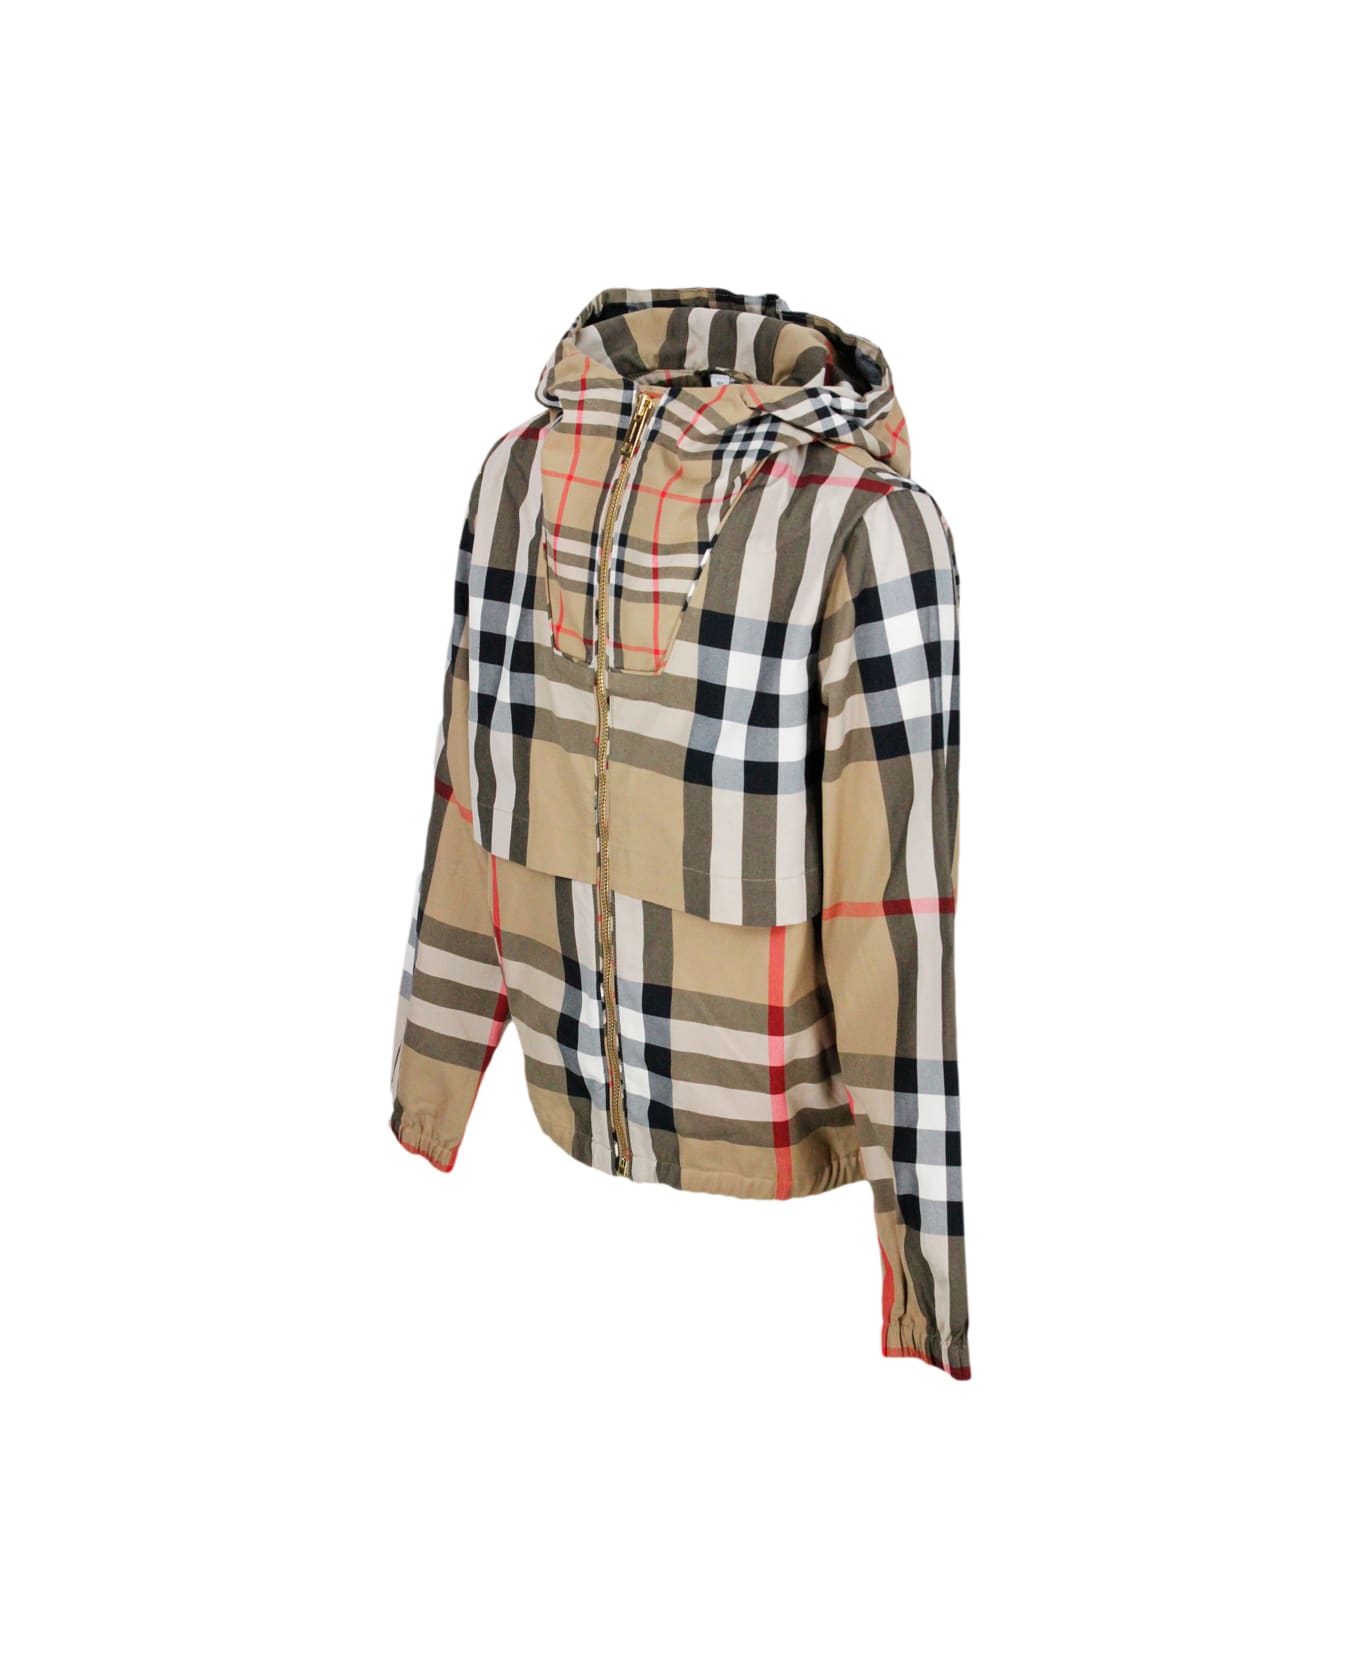 Burberry Cotton Jacket With Hood And Zip Closure In Beige Classic Check - Beige